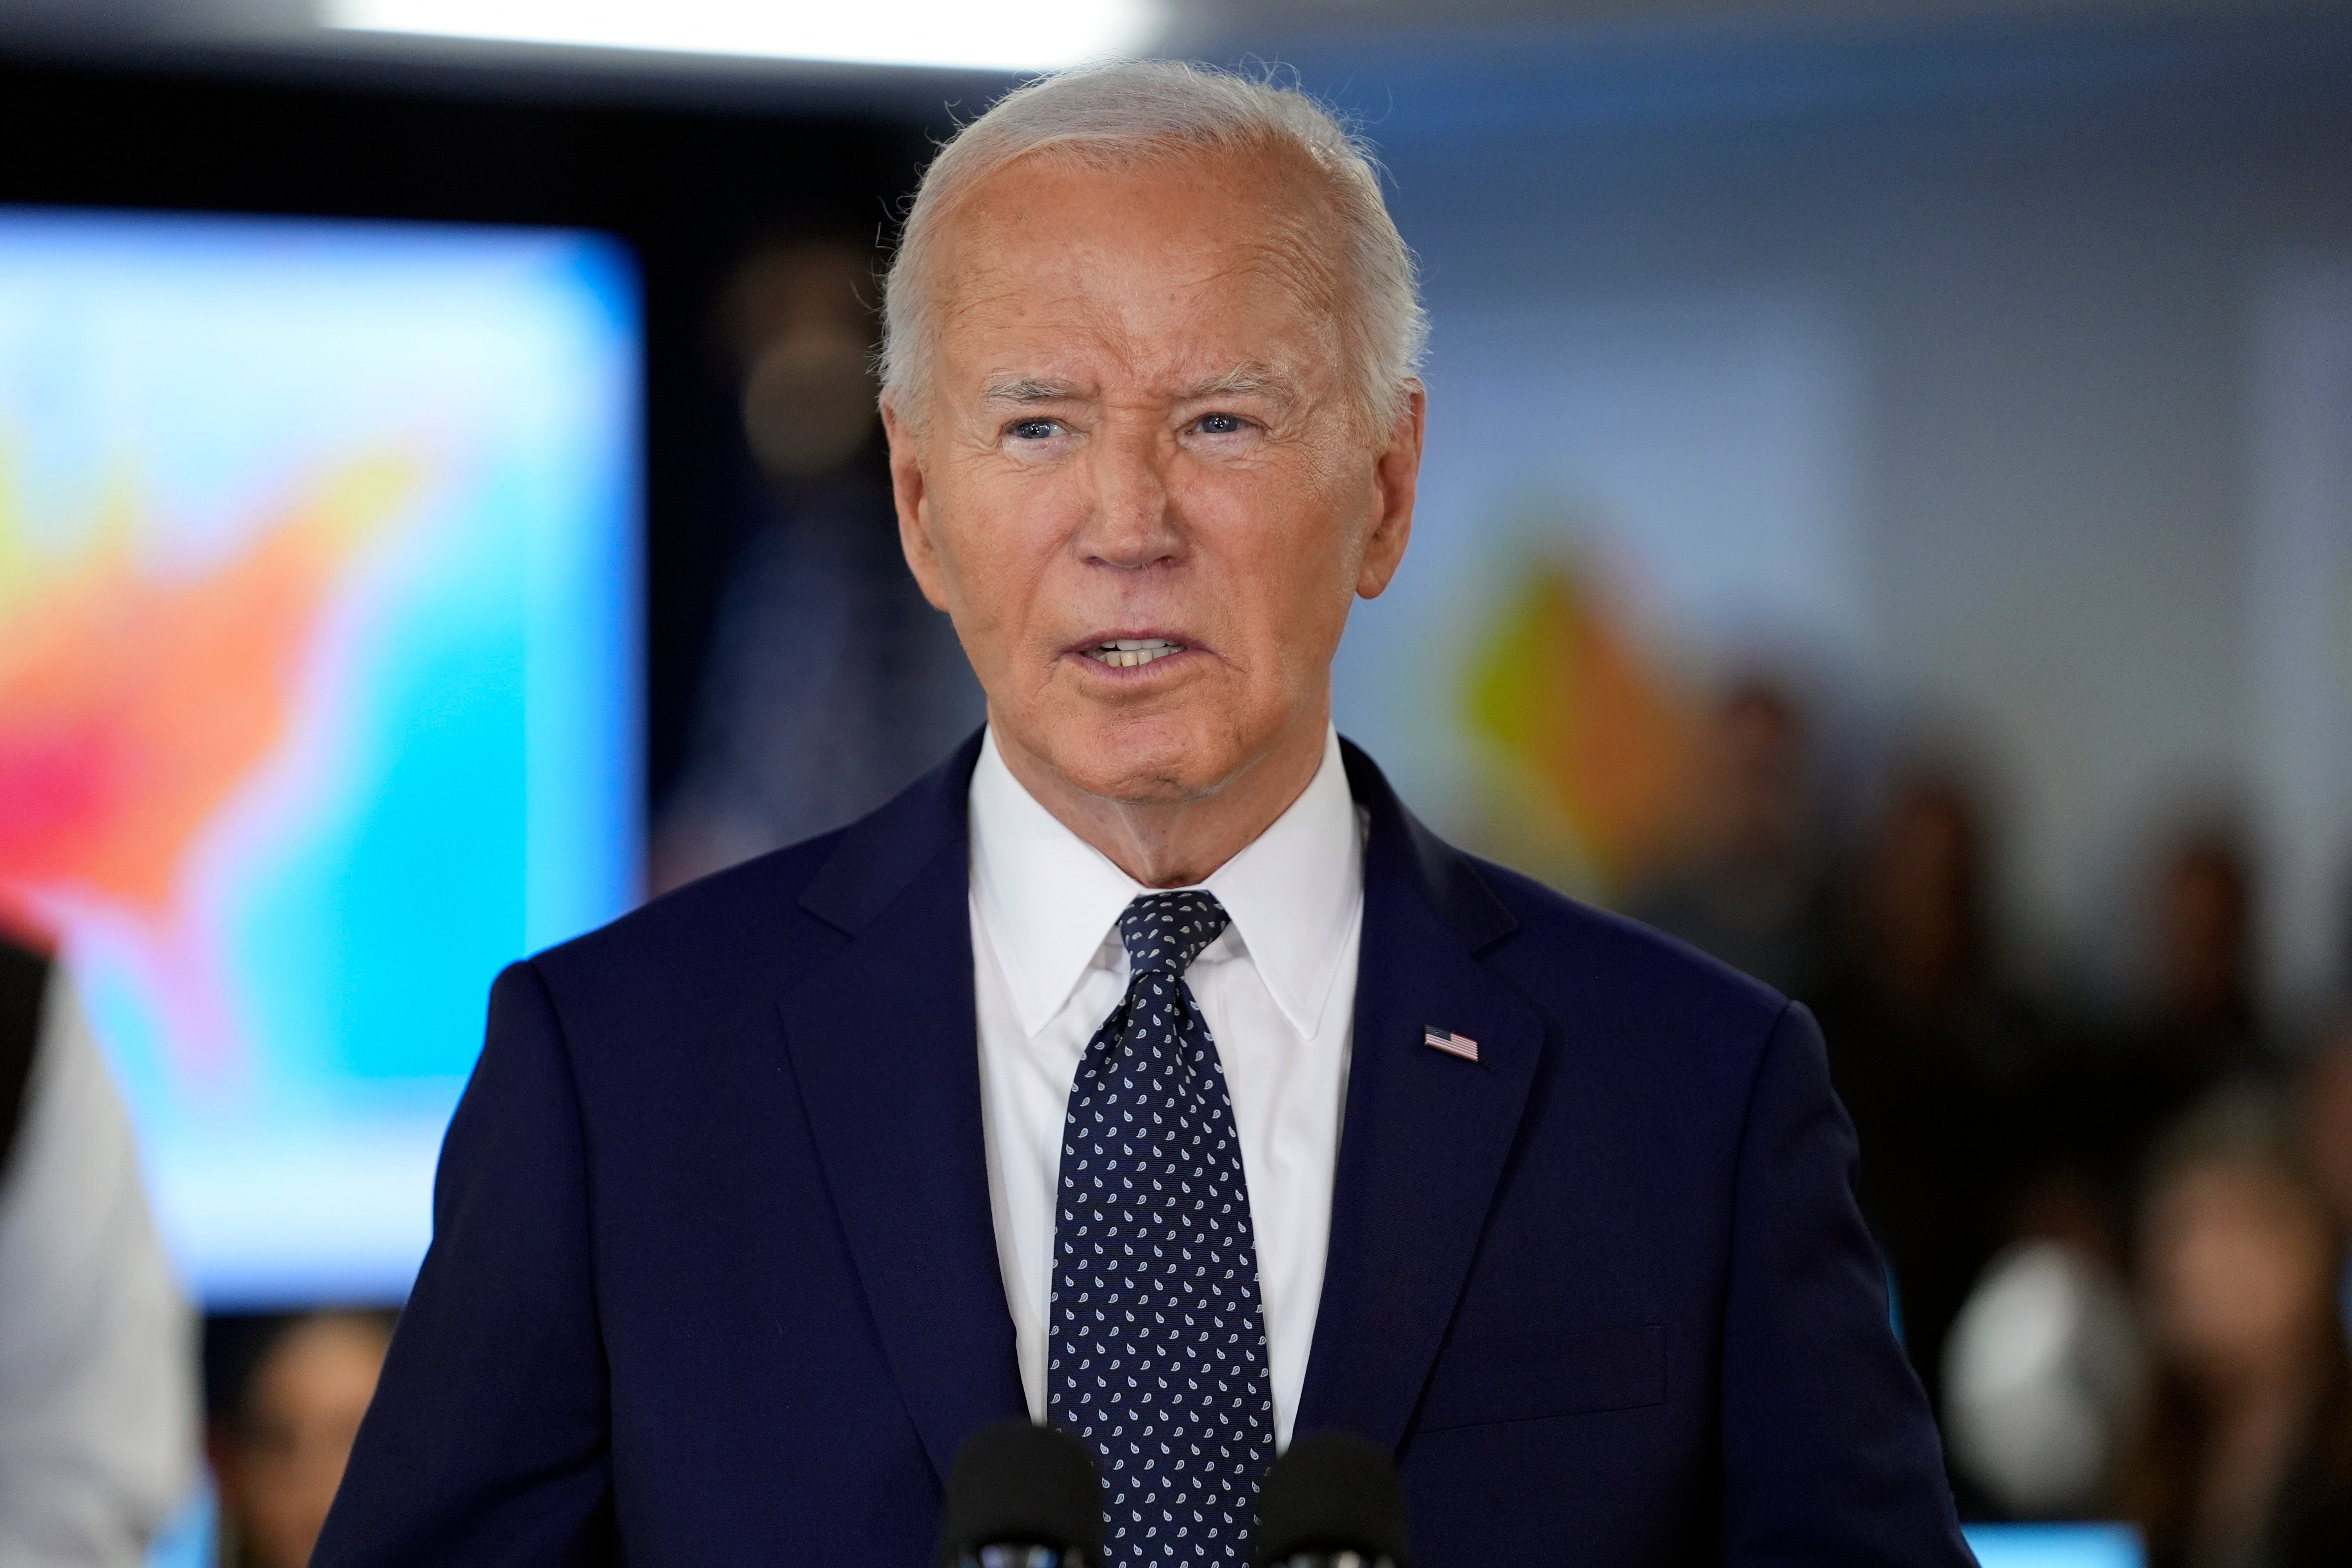 Joe Biden pictured on July 2 in Washington DC. Some of his wealthiest donors are now looking for other options